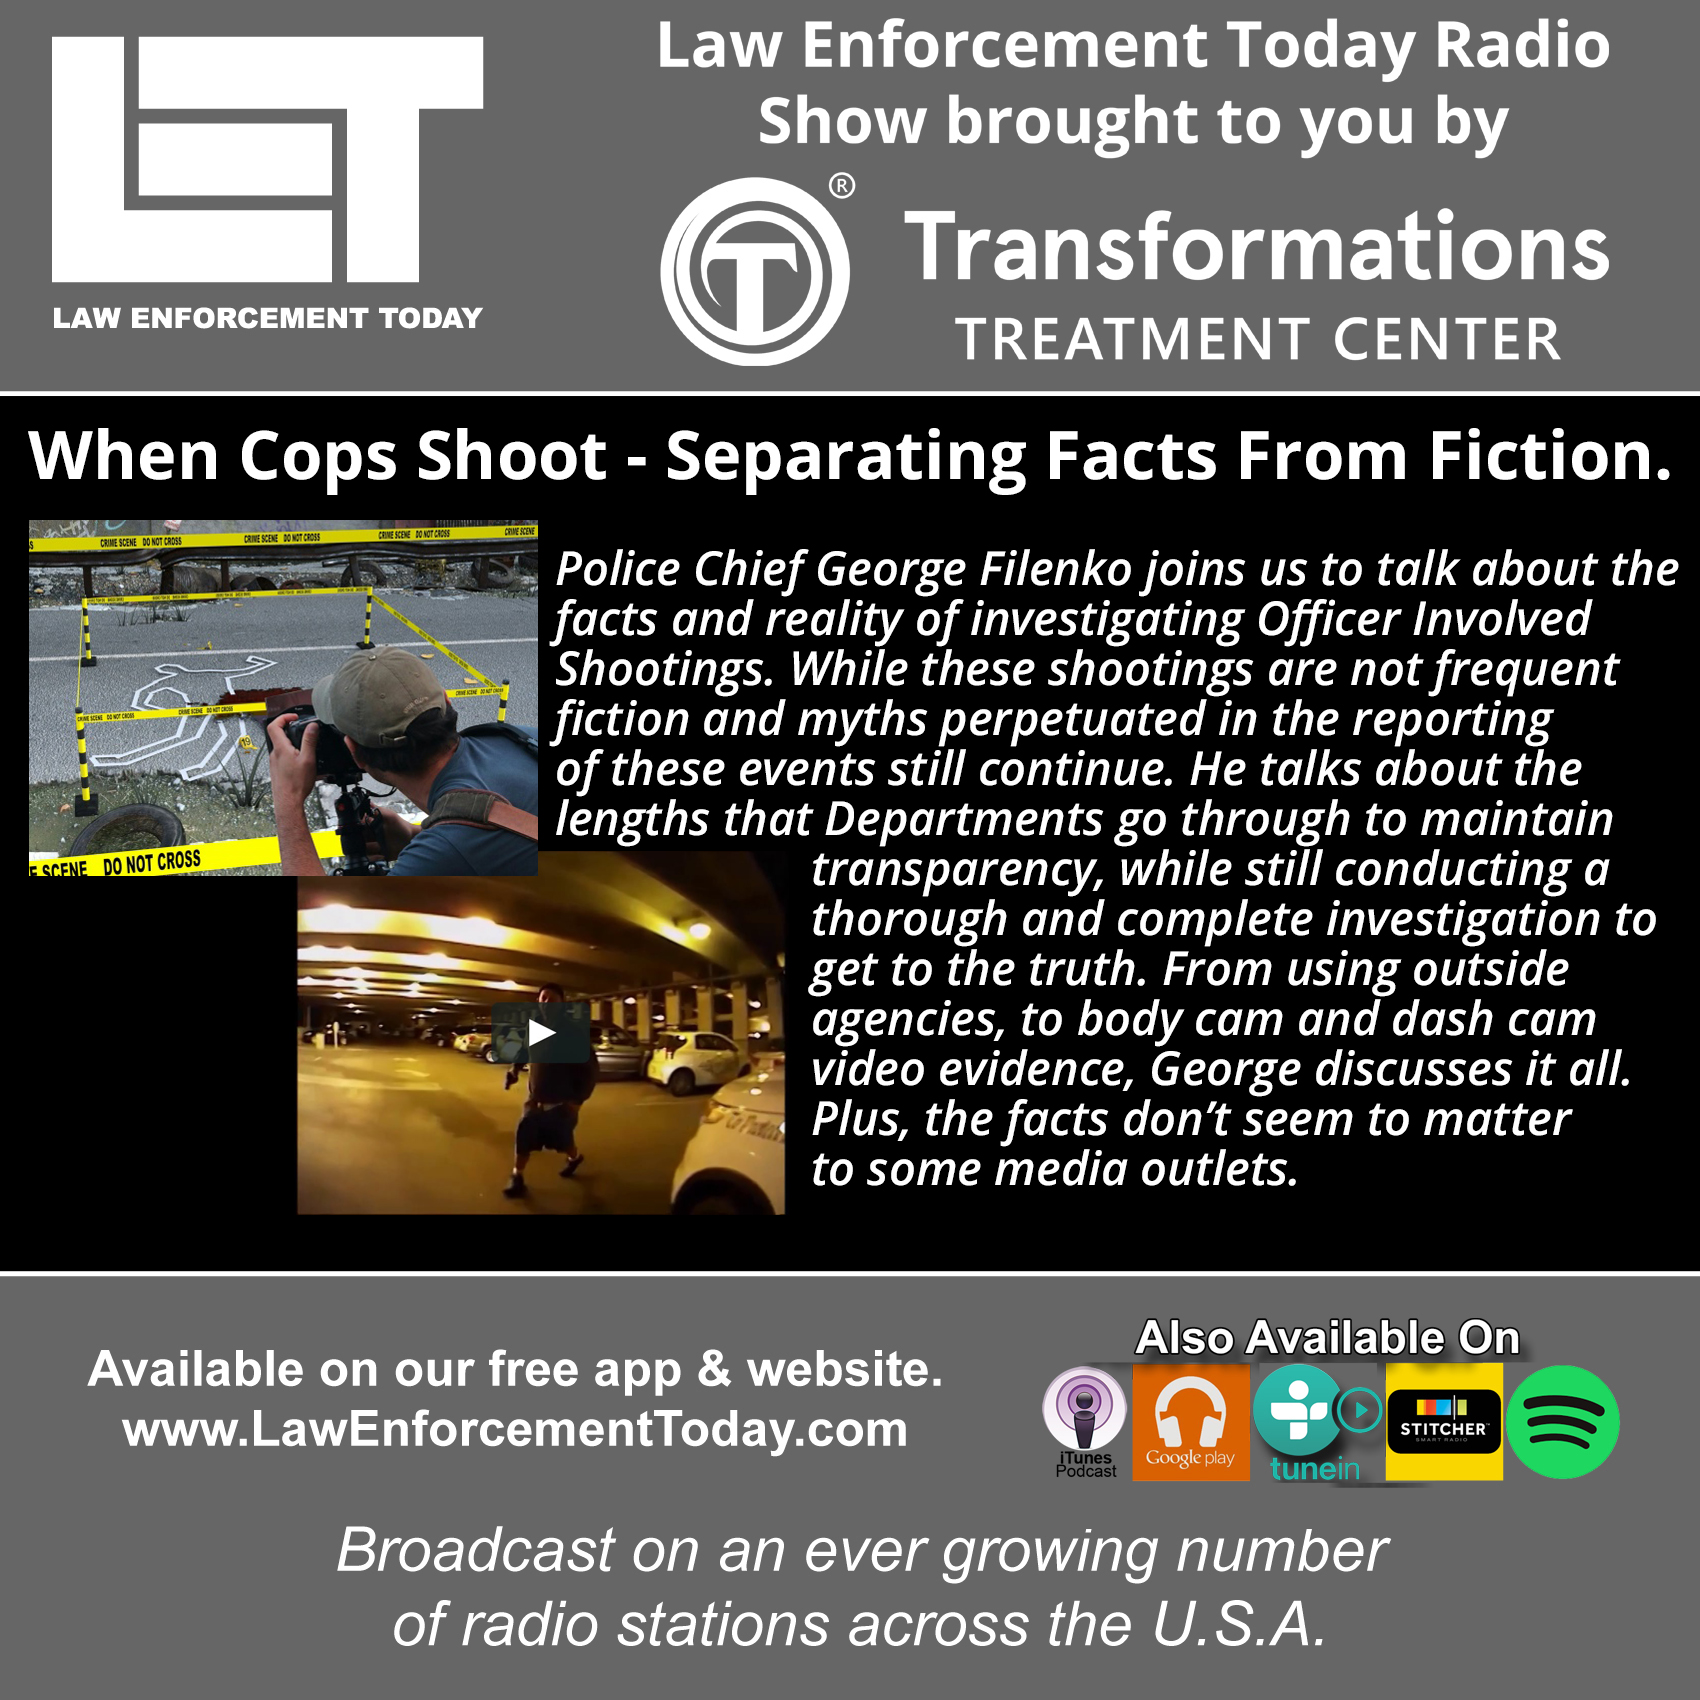 S3E83: When Cops Shoot - Separating Facts From Fiction.